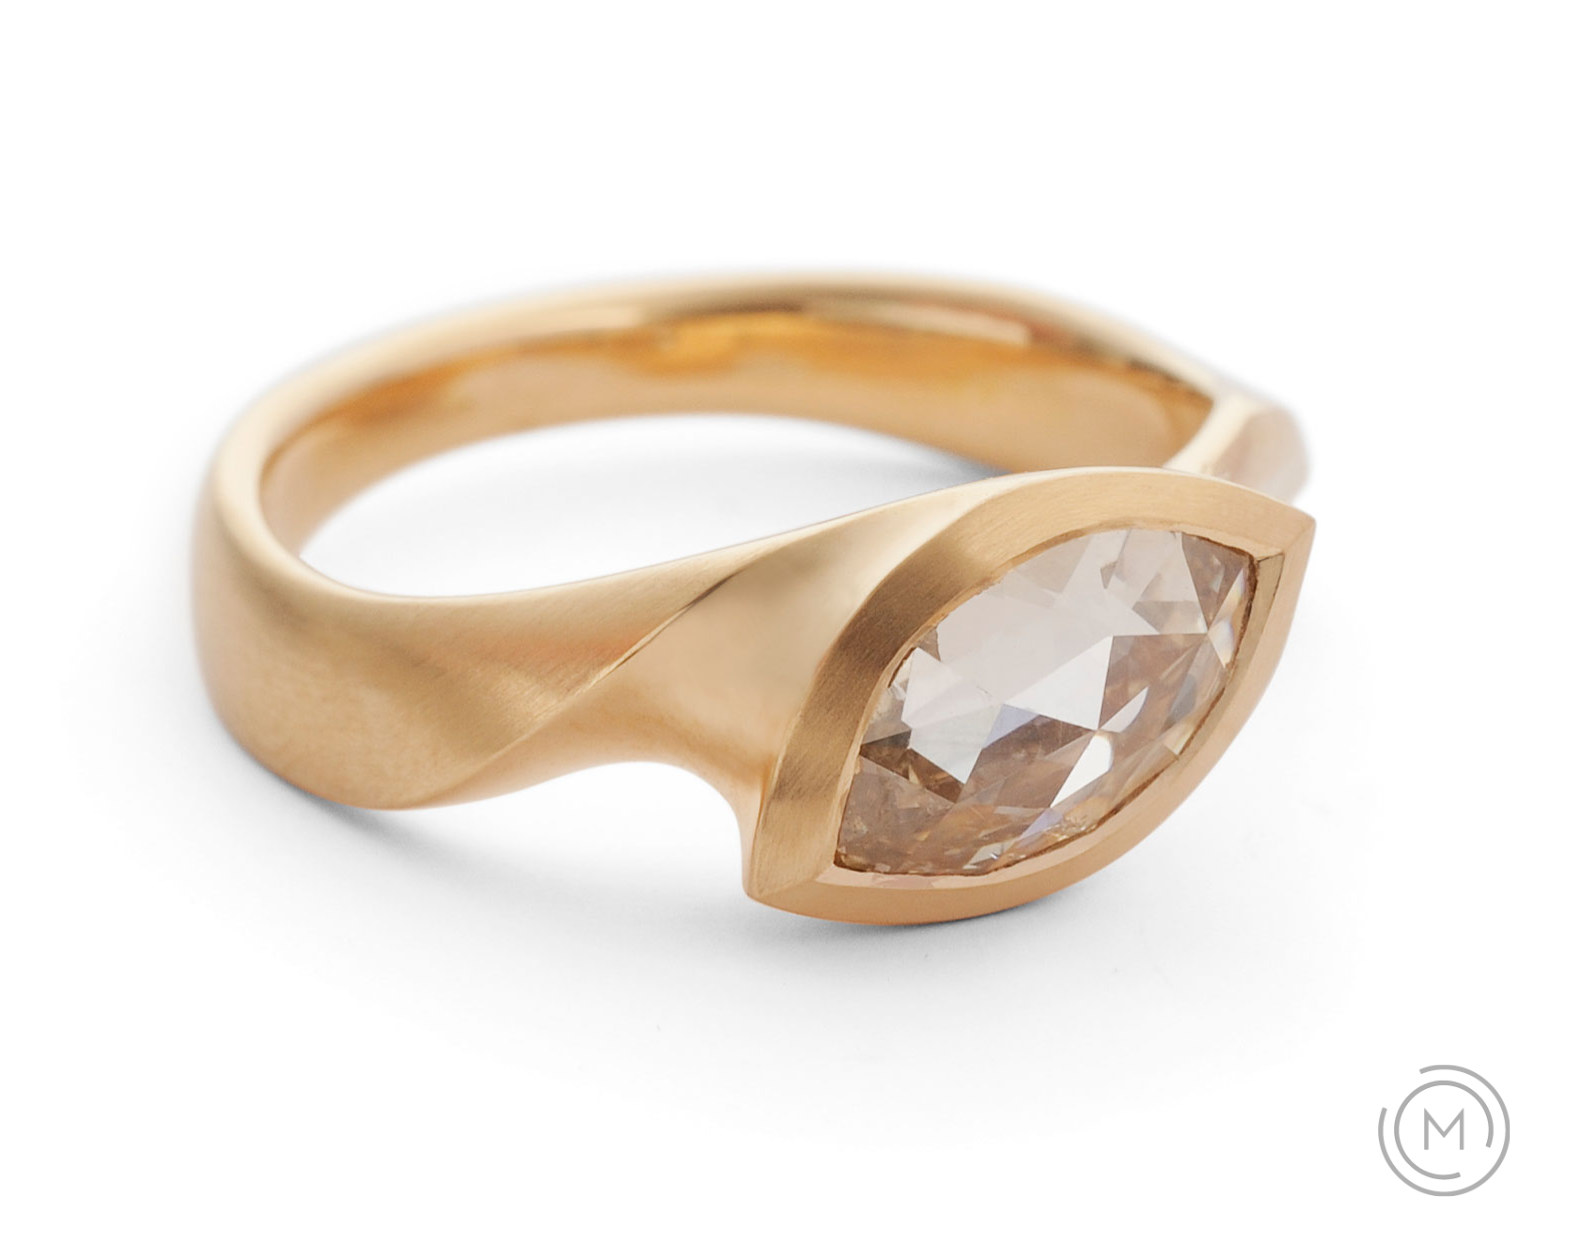 1ct rose cut marquise diamond in 18ct rose gold carved ring